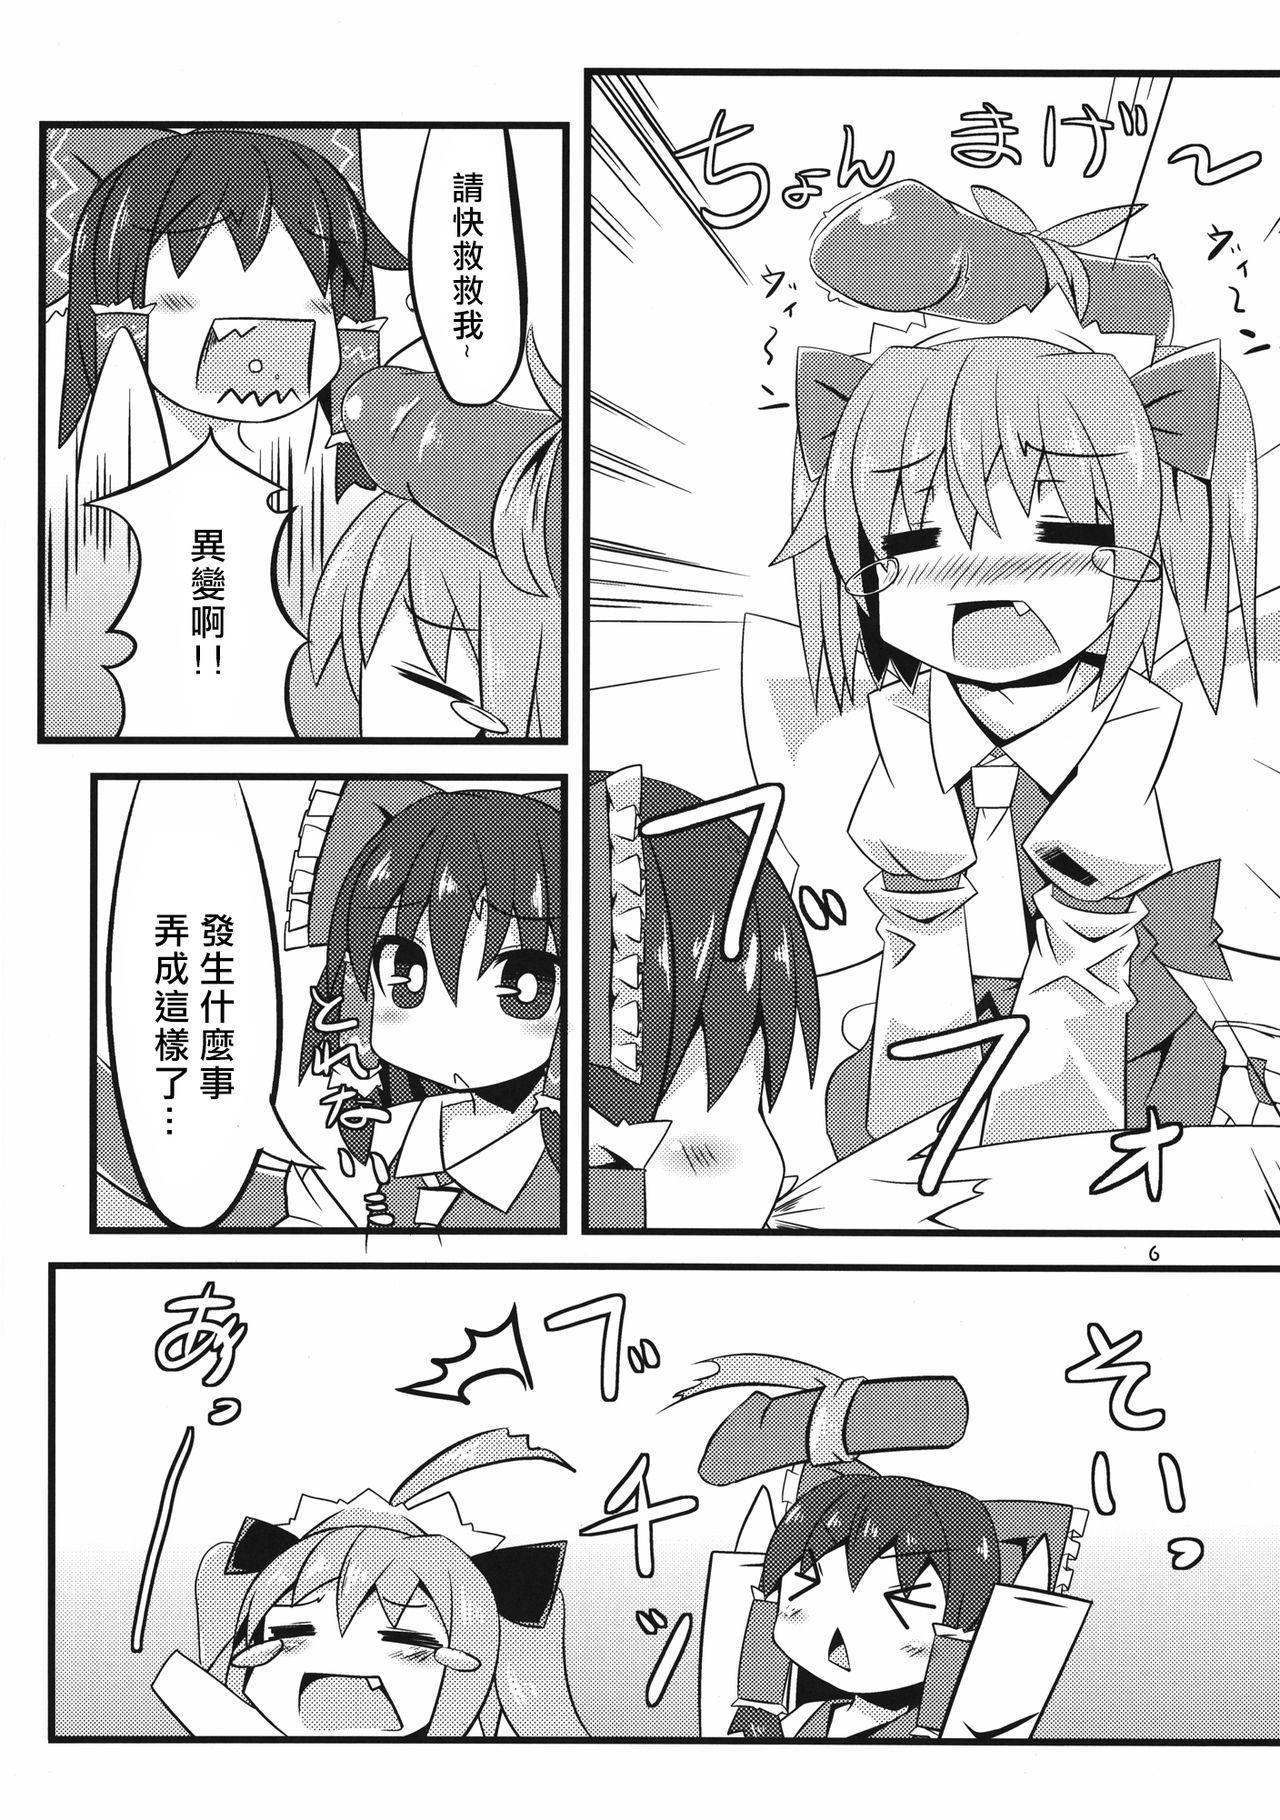 Bra Flan-chan to Asobo!! - Touhou project Toy - Page 6